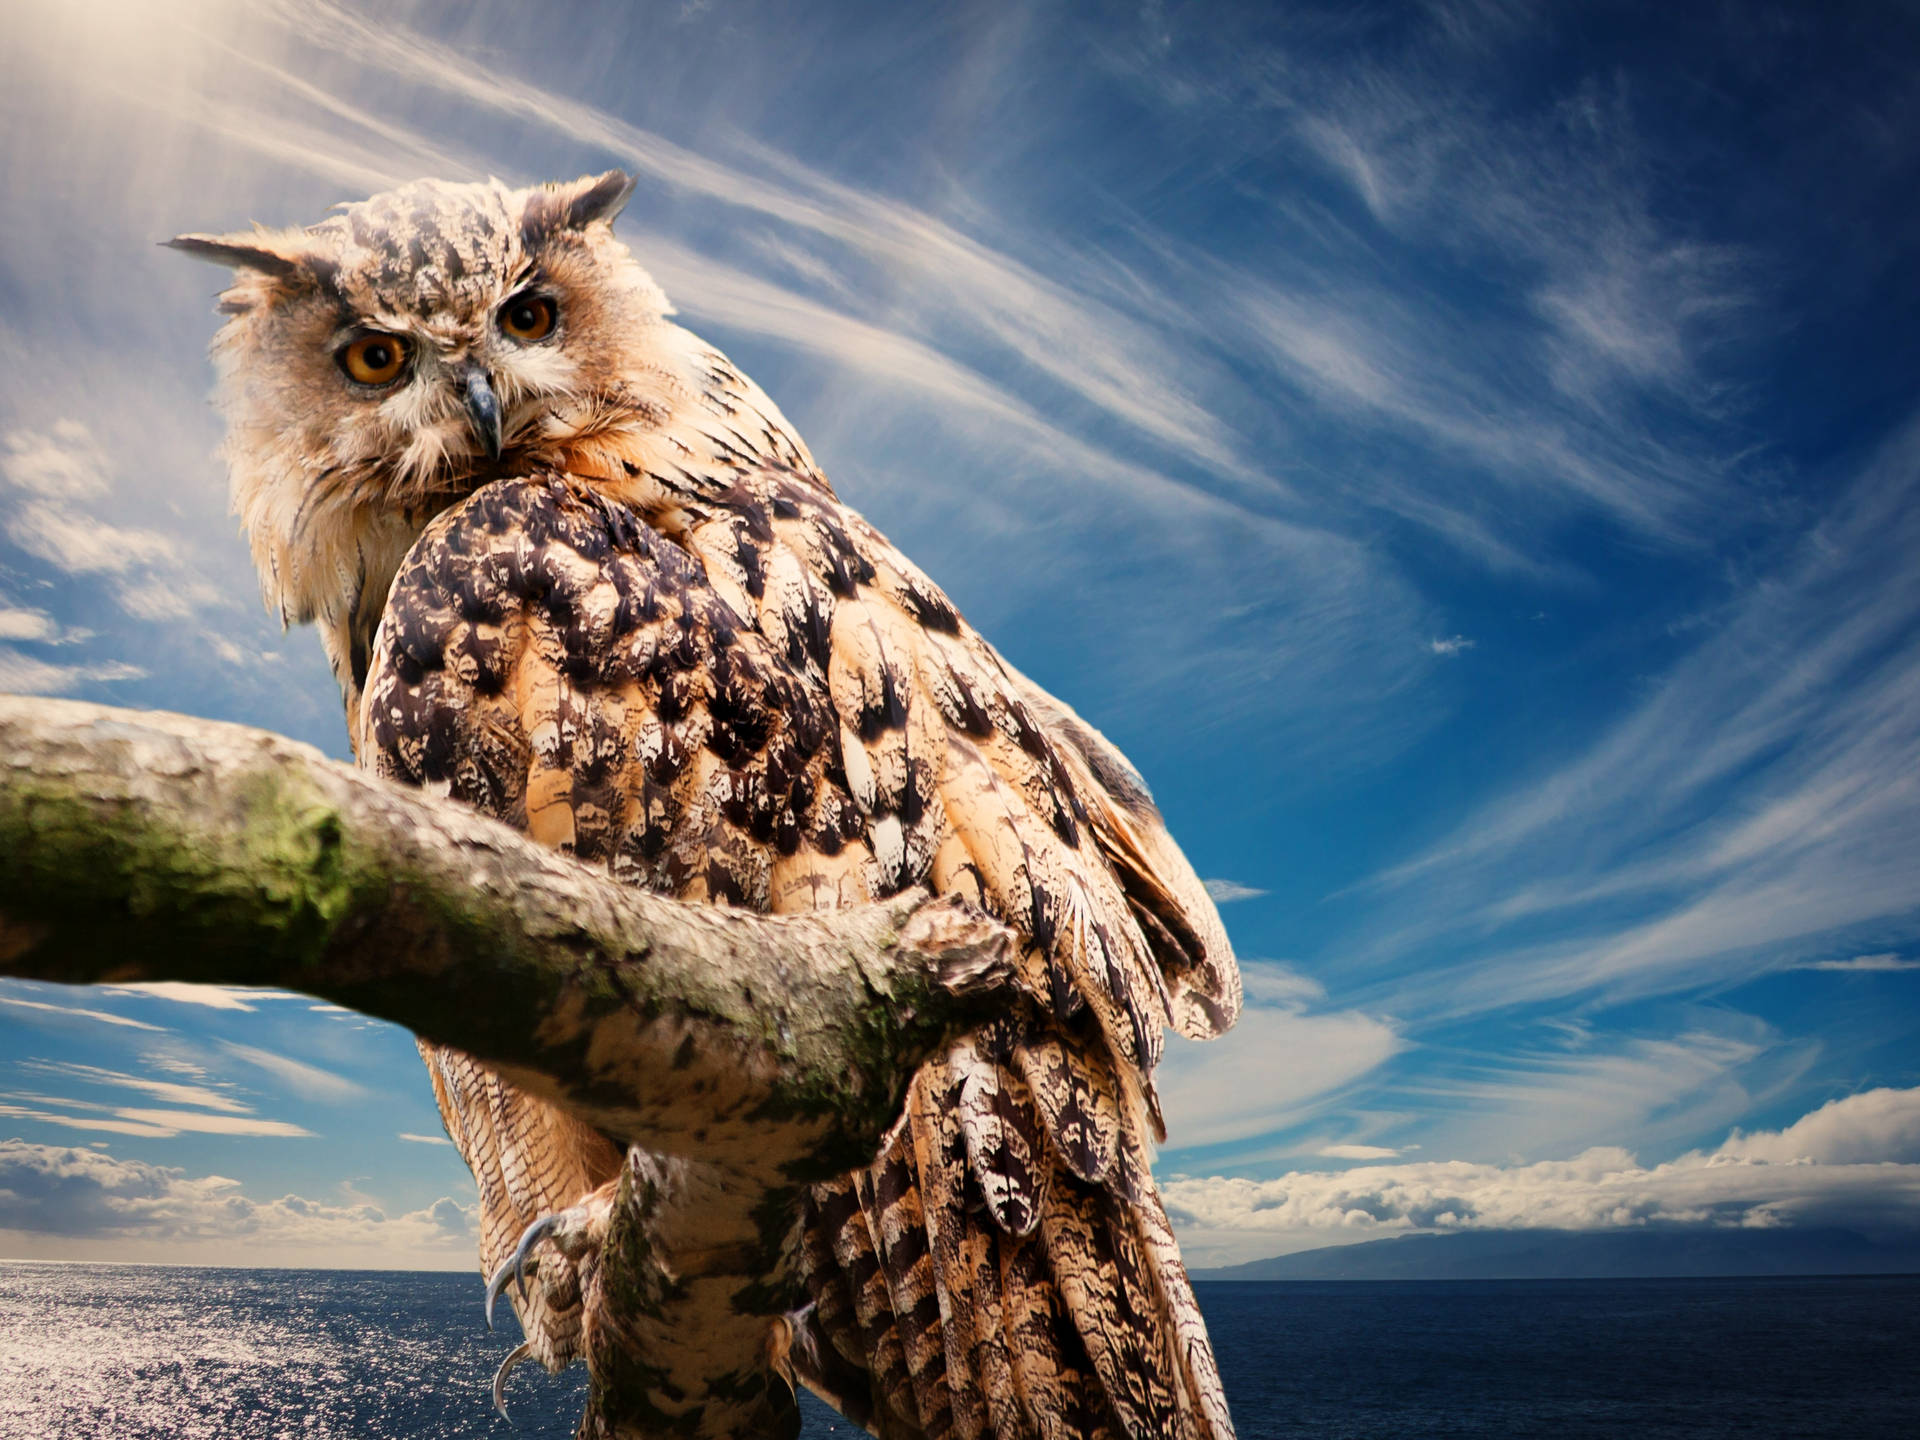 A brown owl perched at sunset overlooking the ocean Wallpaper